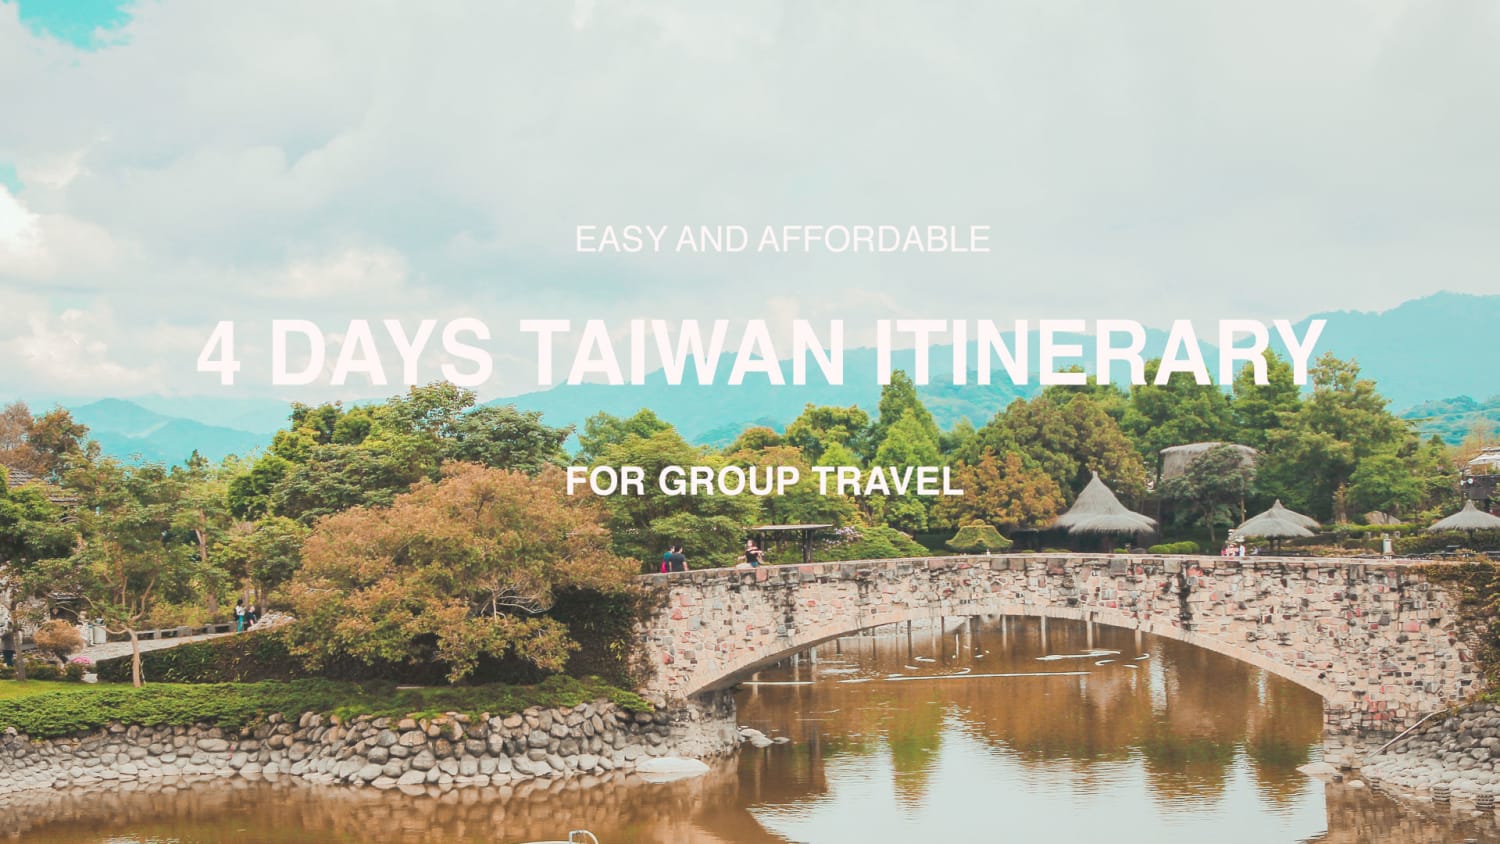 Easy and Affordable 4 Days Taiwan Itinerary for Group Travel